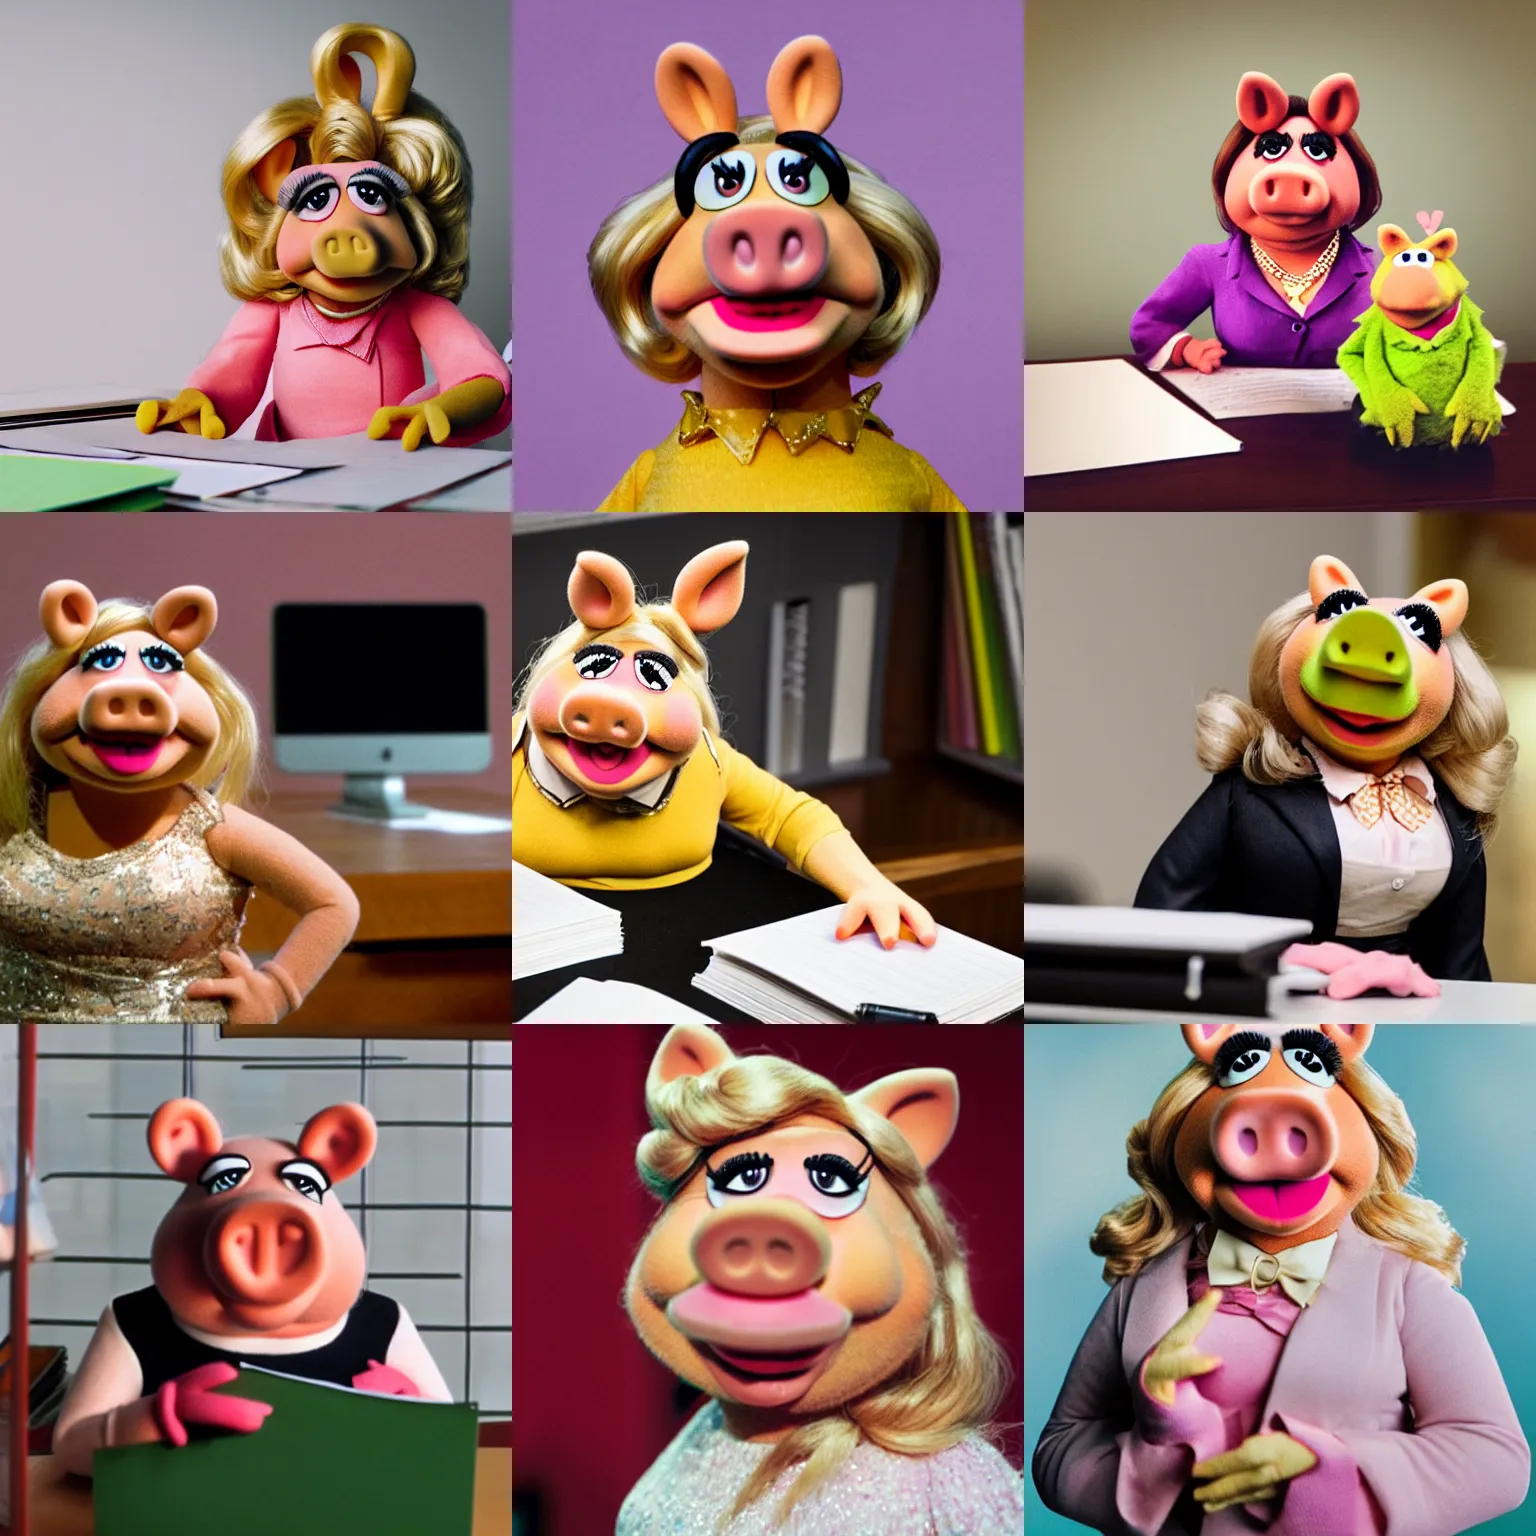 Prompt: portrait of miss piggy from the muppet show working in an office